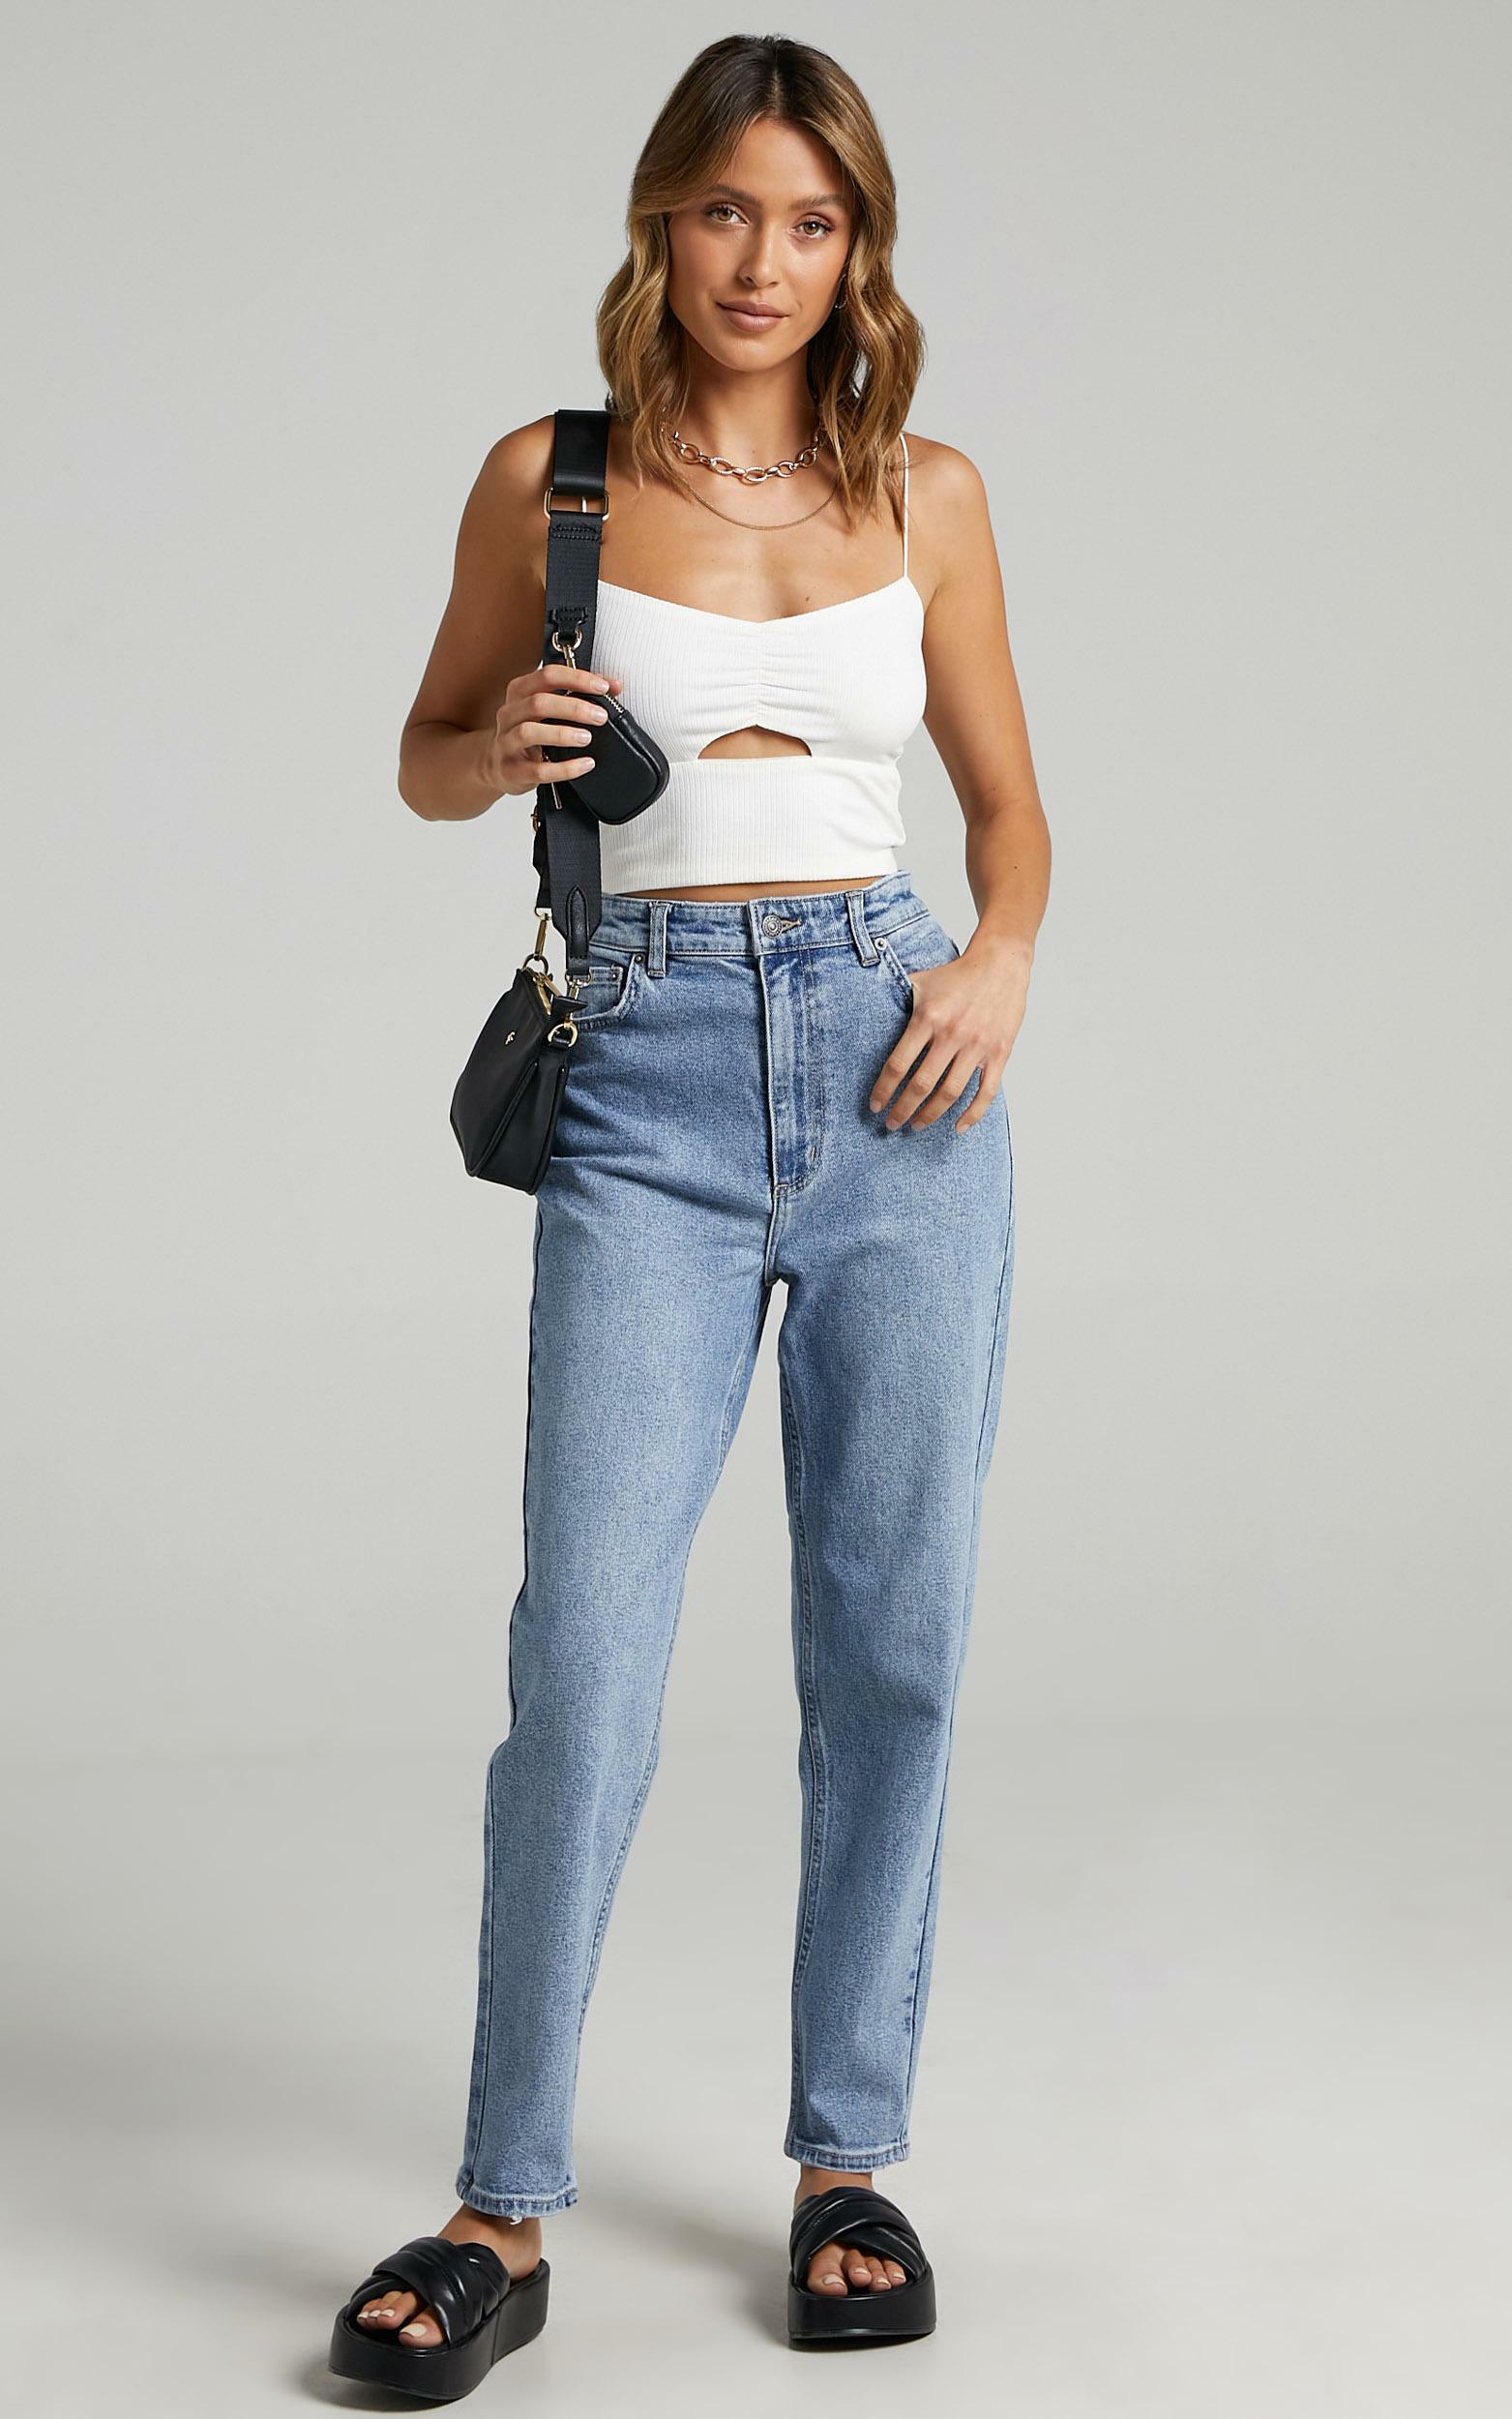 Lee - Hourglass High Mom Jeans in Bias Blue - 06, BLU1, hi-res image number null